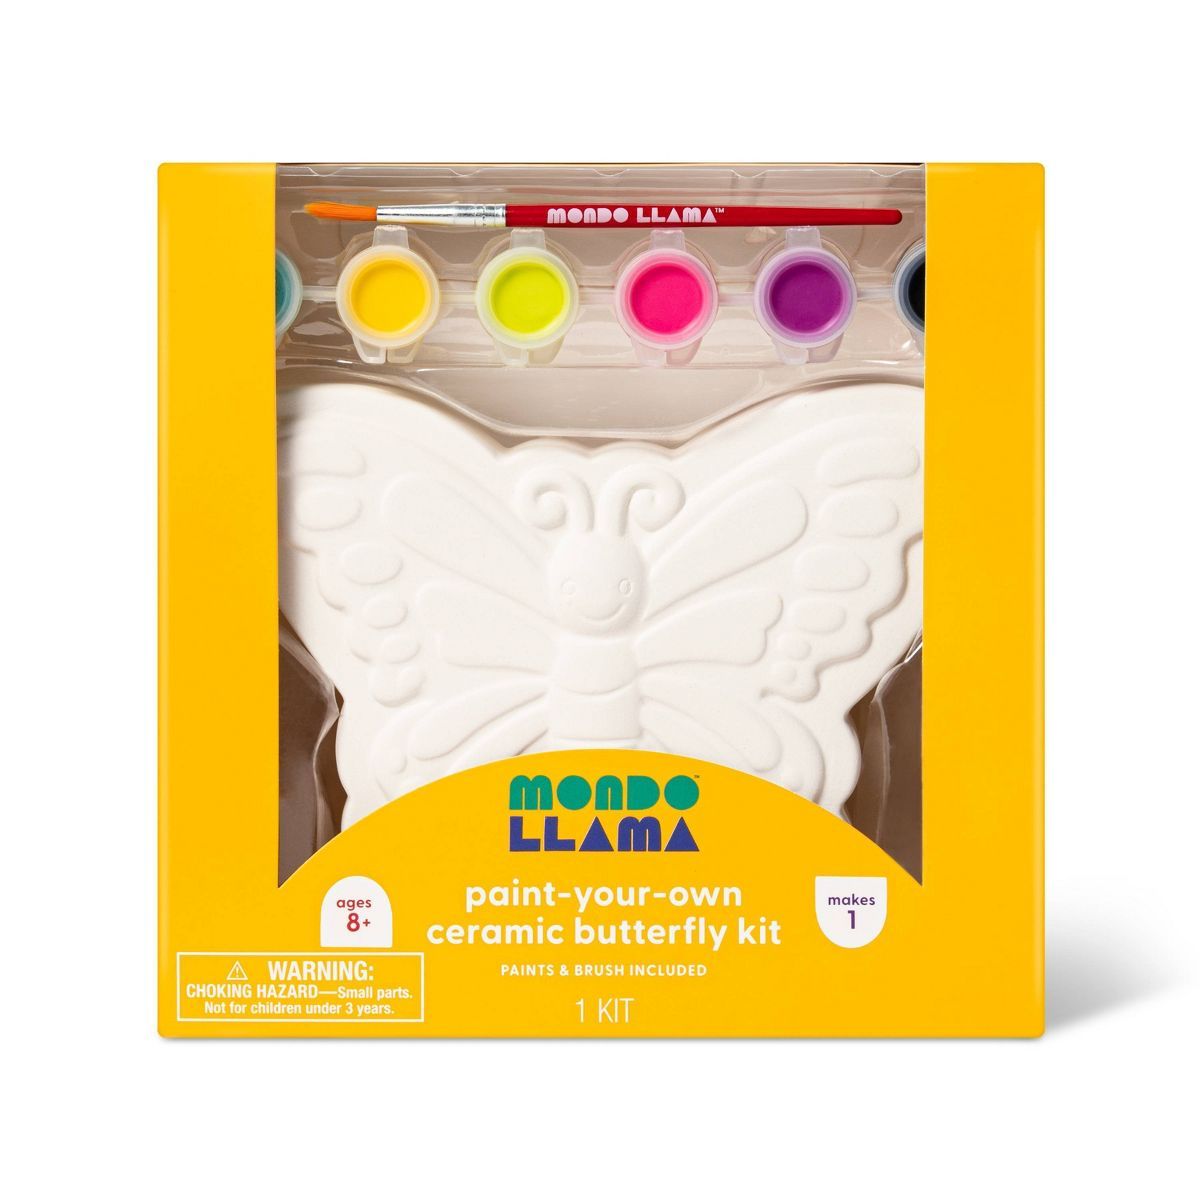 Paint-Your-Own Ceramic Butterfly Craft Kit - Mondo Llama™ | Target